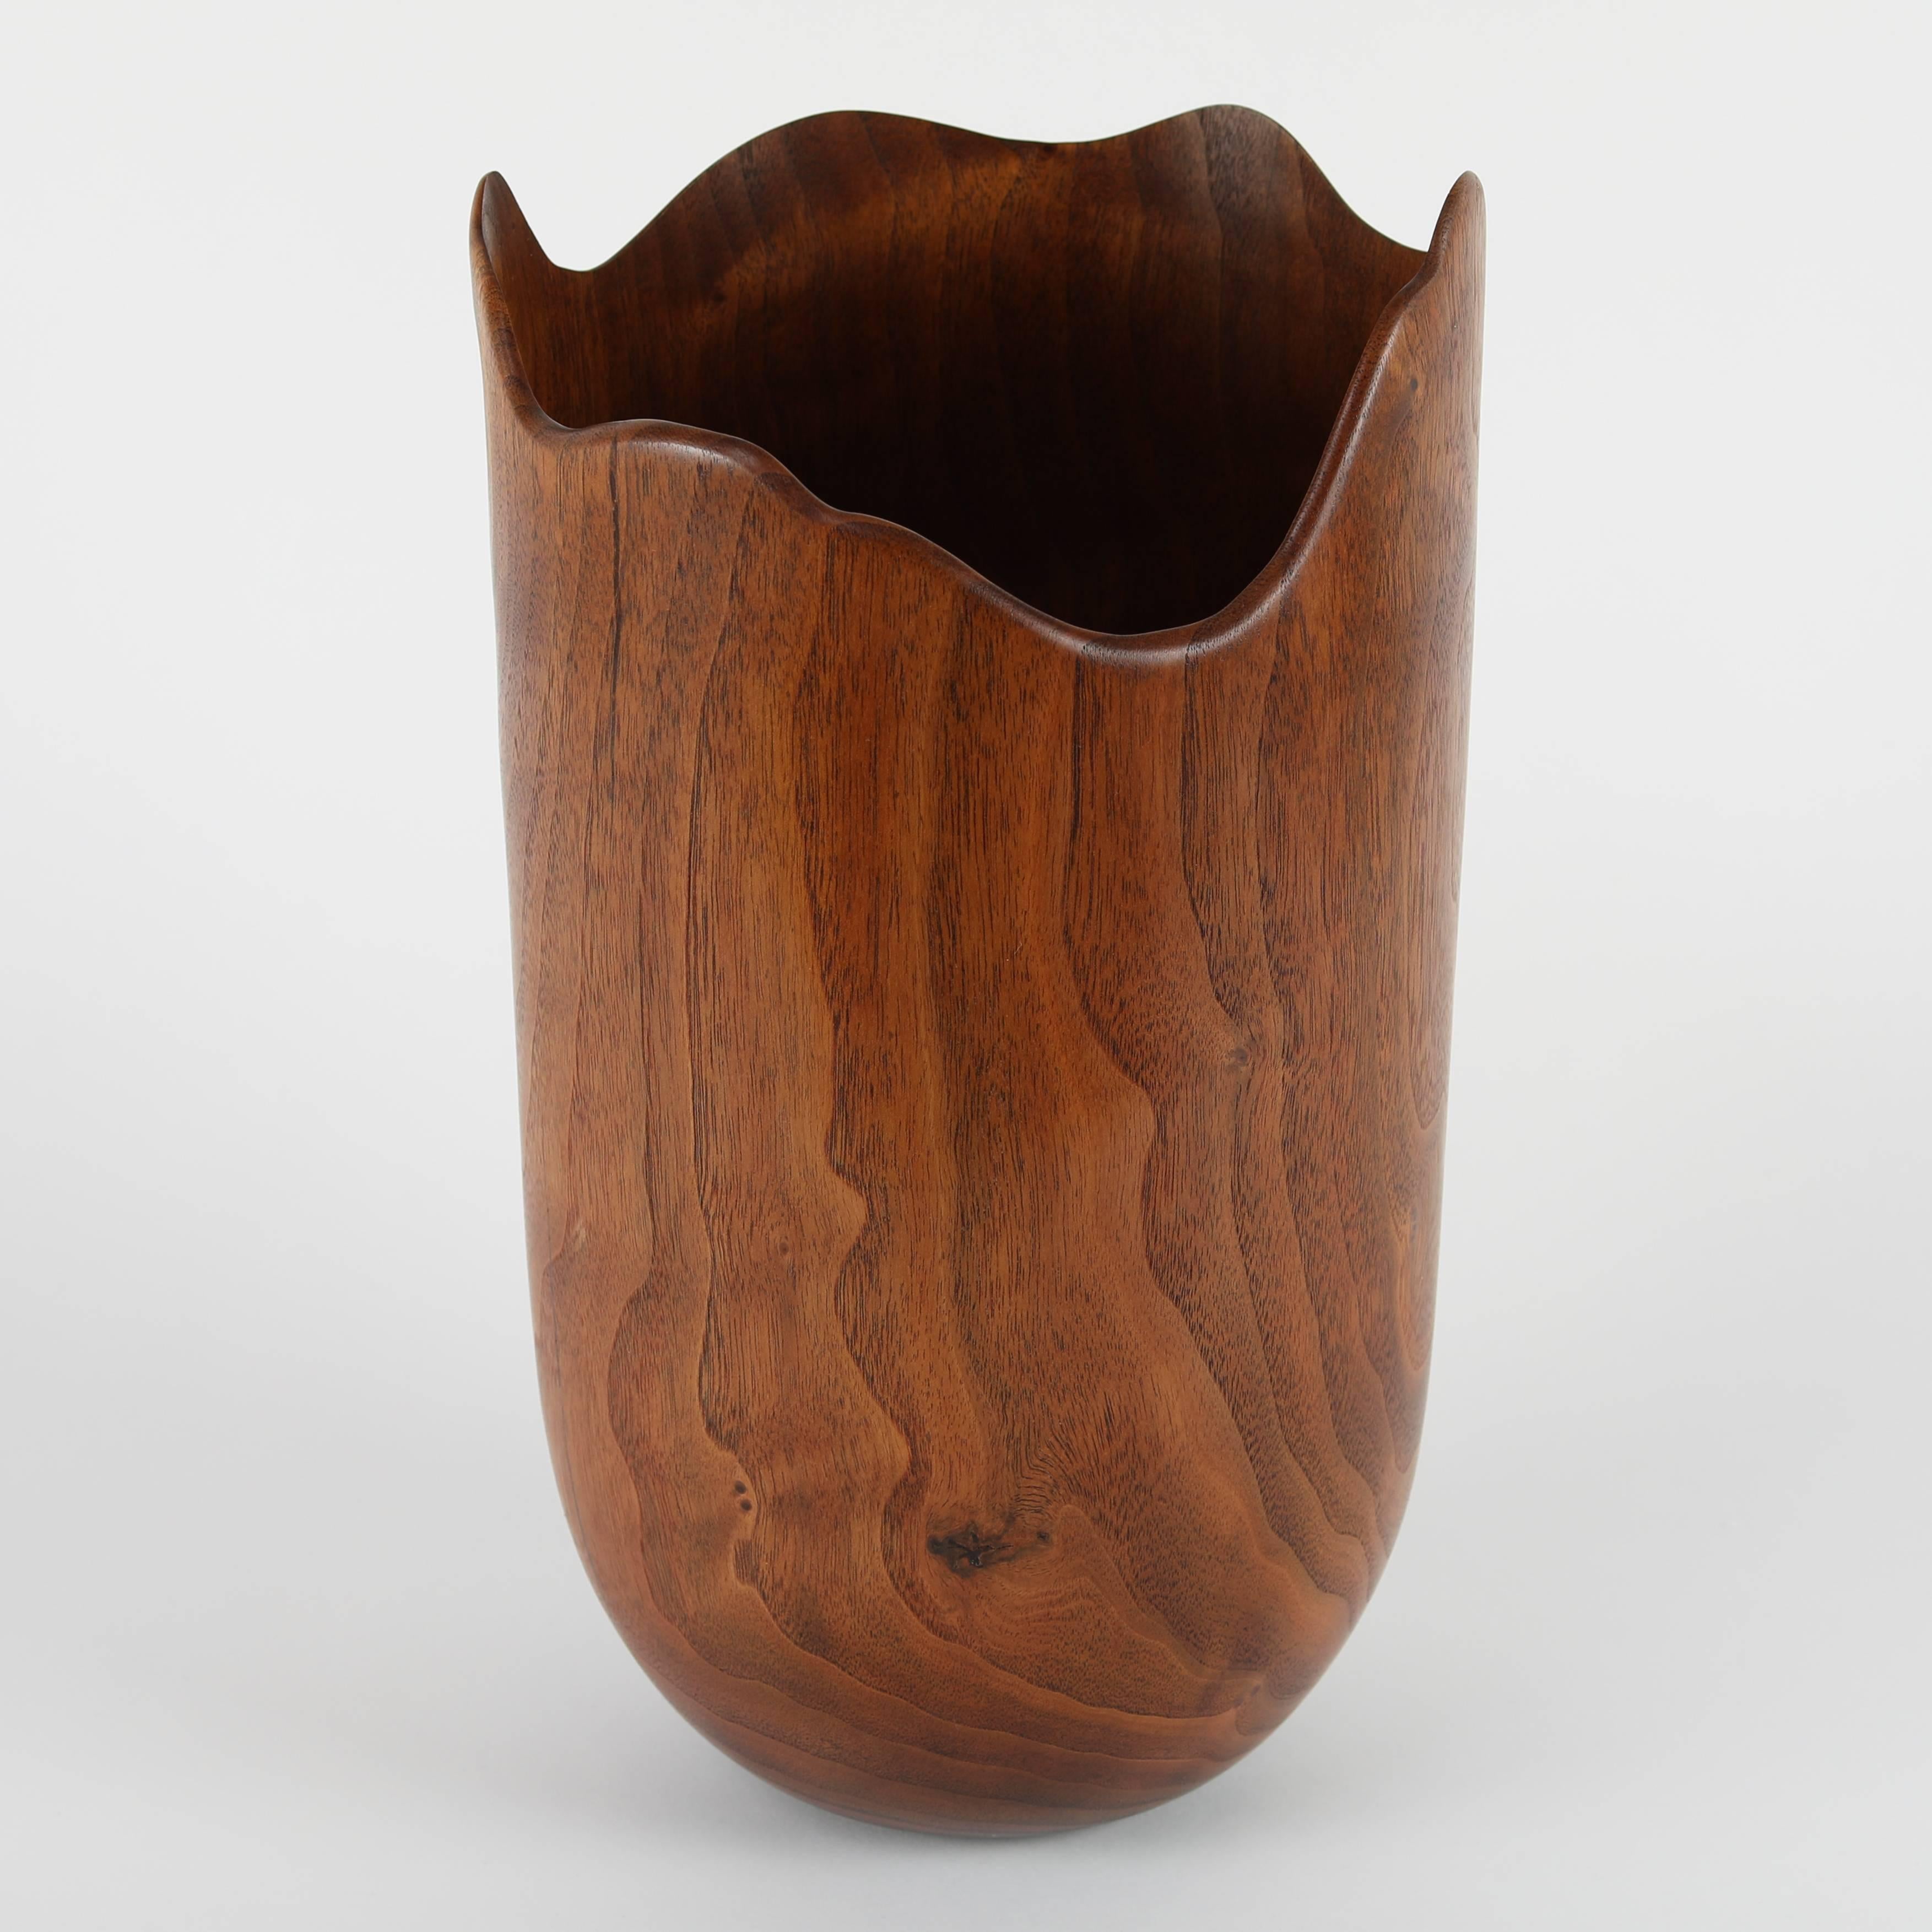 American Turned Walnut Vase with Free-Form Top by Mike Kornblum